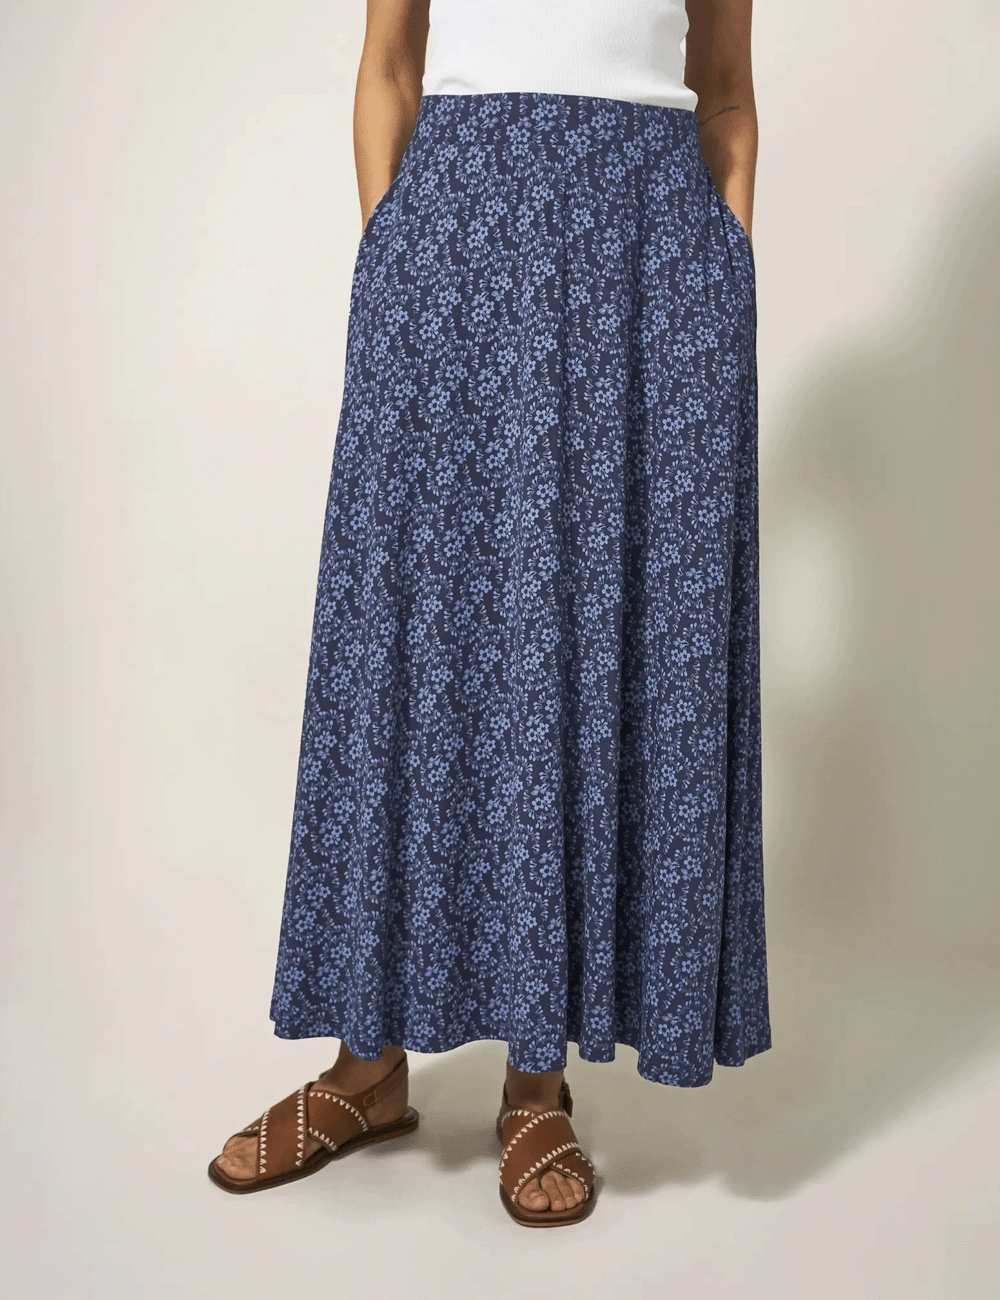 Woman wearing the Jada Maxi Skirt with her hands in the pockets